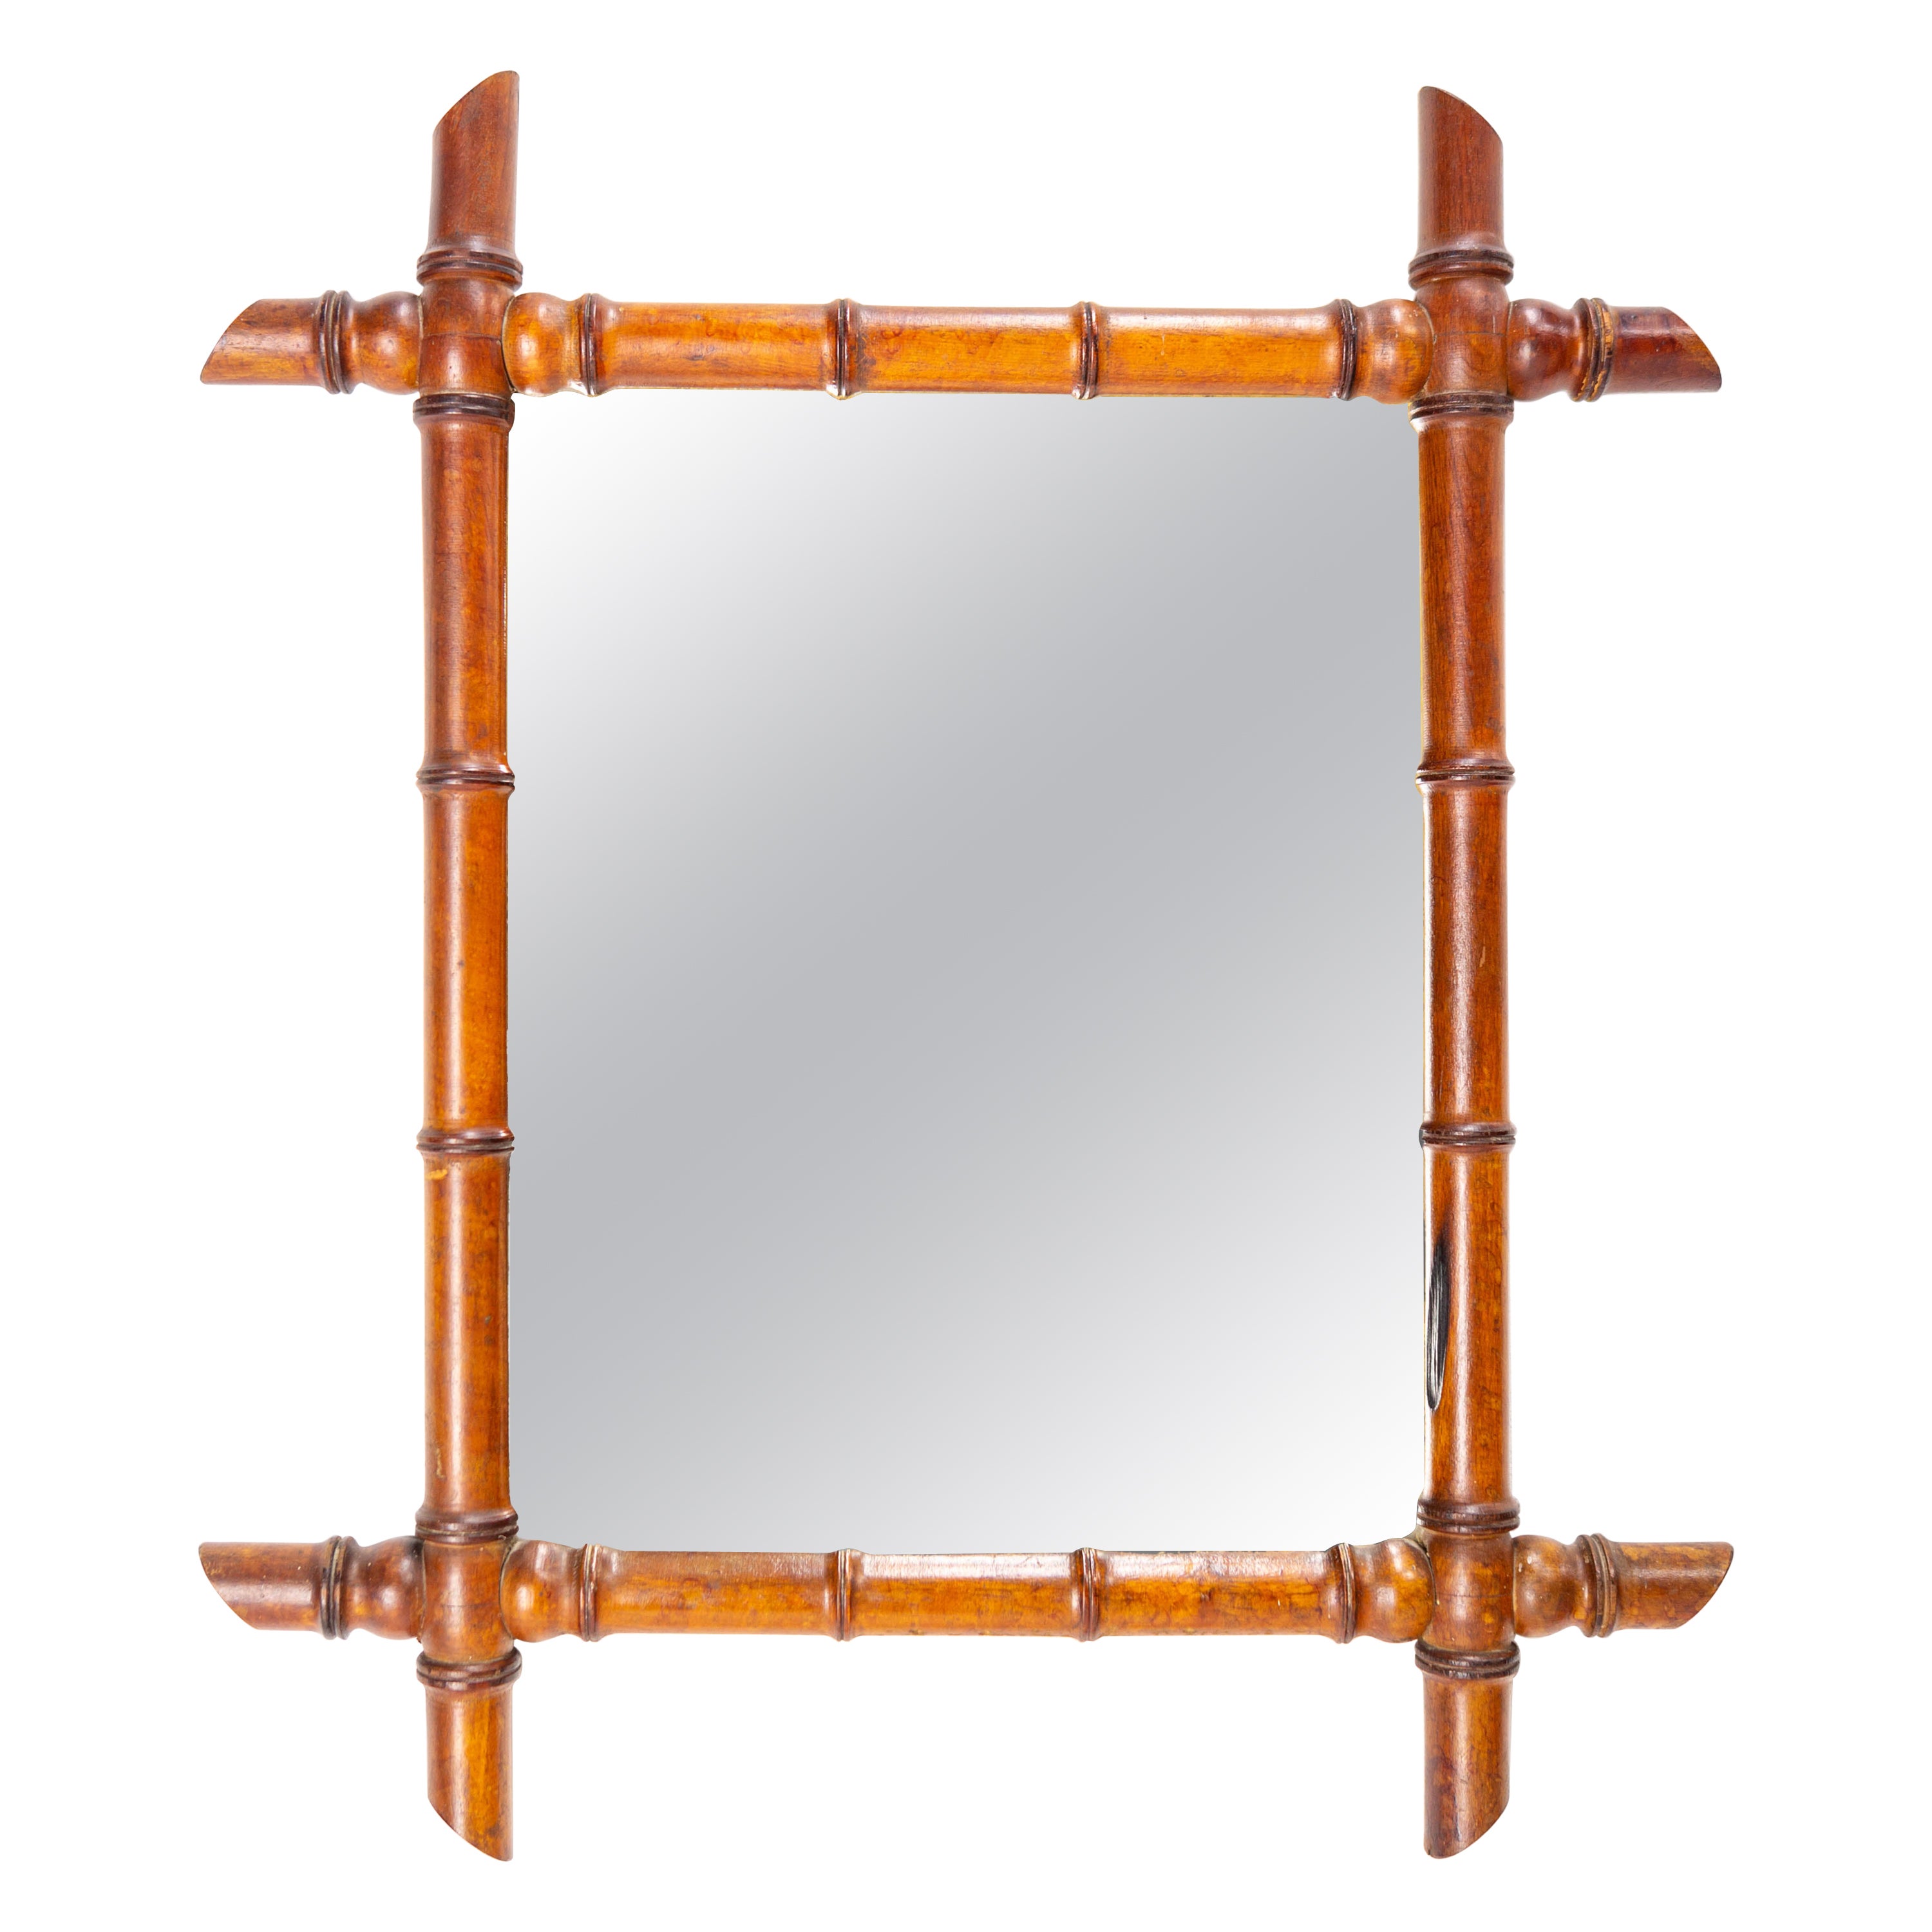 French Art Nouveau Mirror with Beech Frame Bamboo Imitation, Late 19th Century